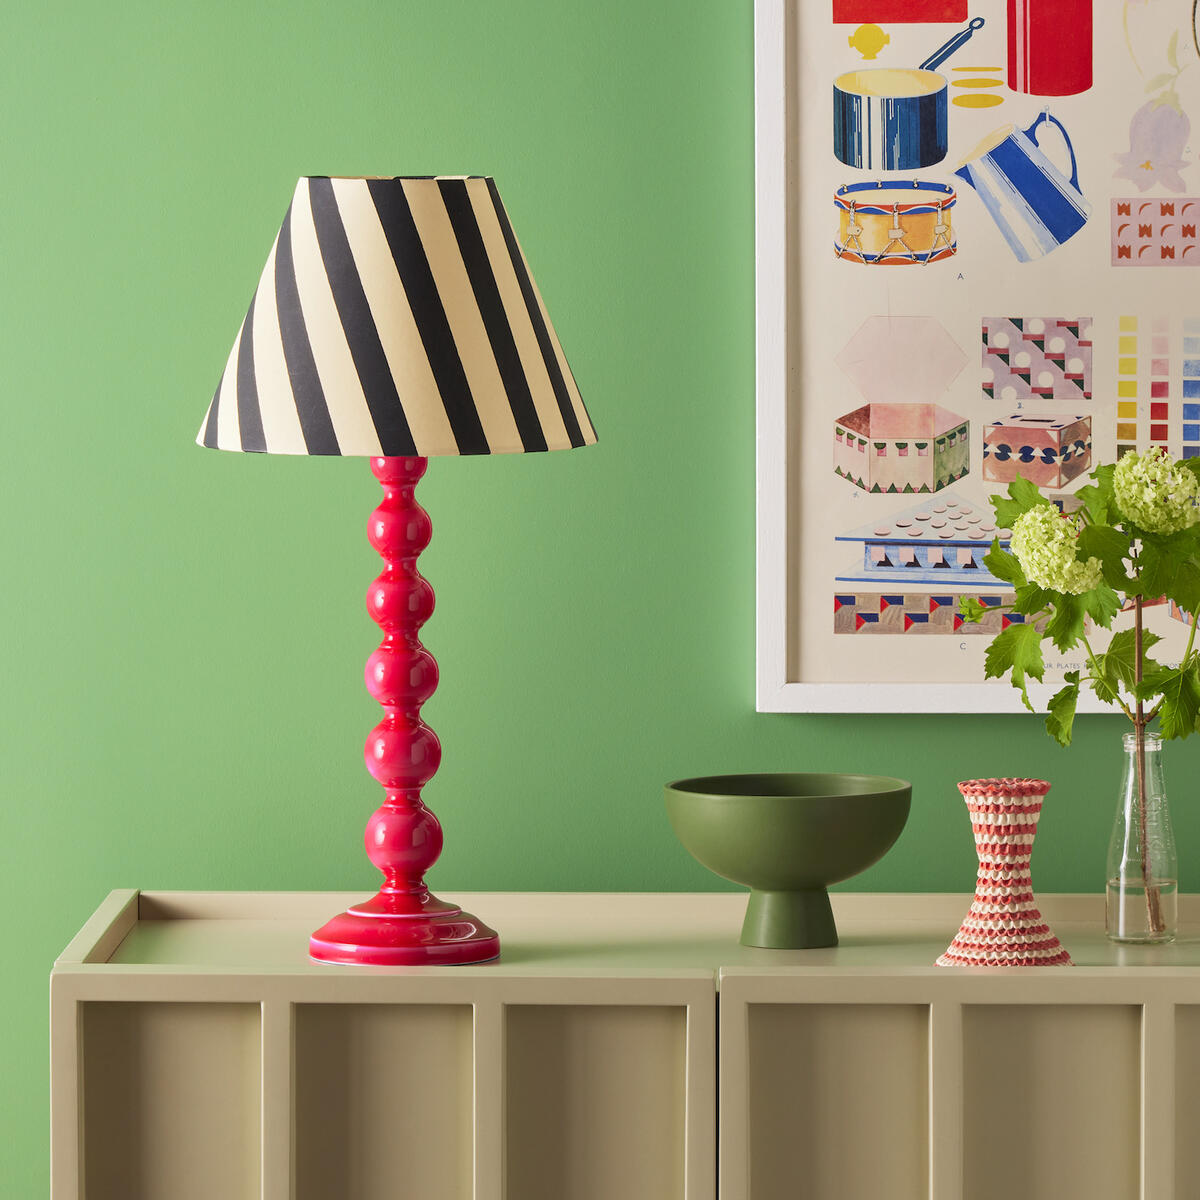 Morris at Home fabrics arrive in the US, lively new looks from Pooky Lighting, Maharam and more